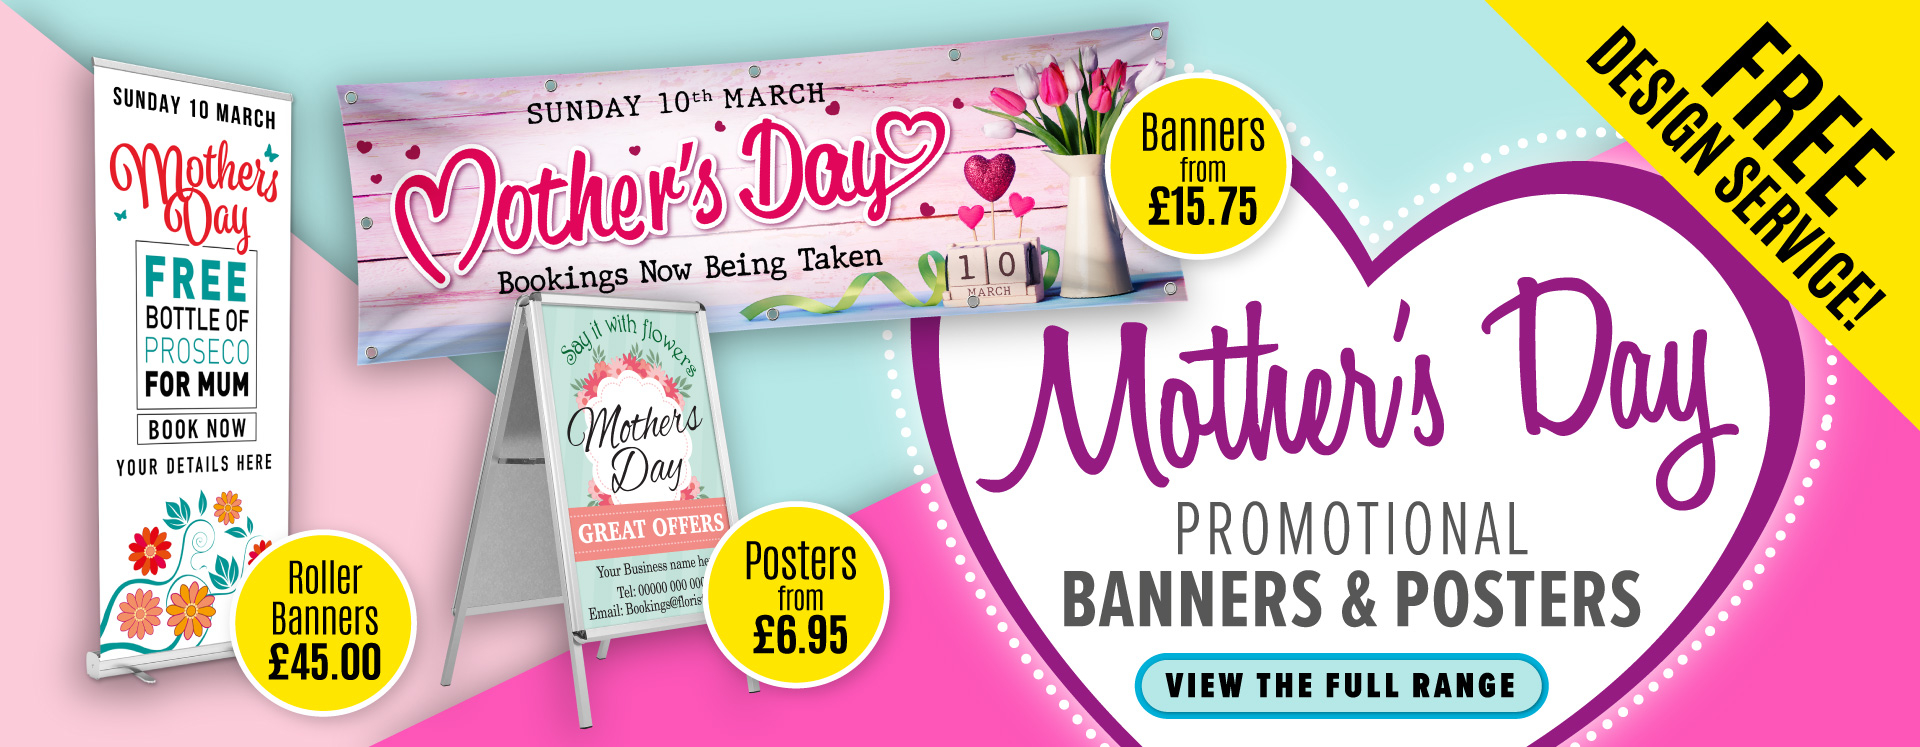 Mothers Day Promotions